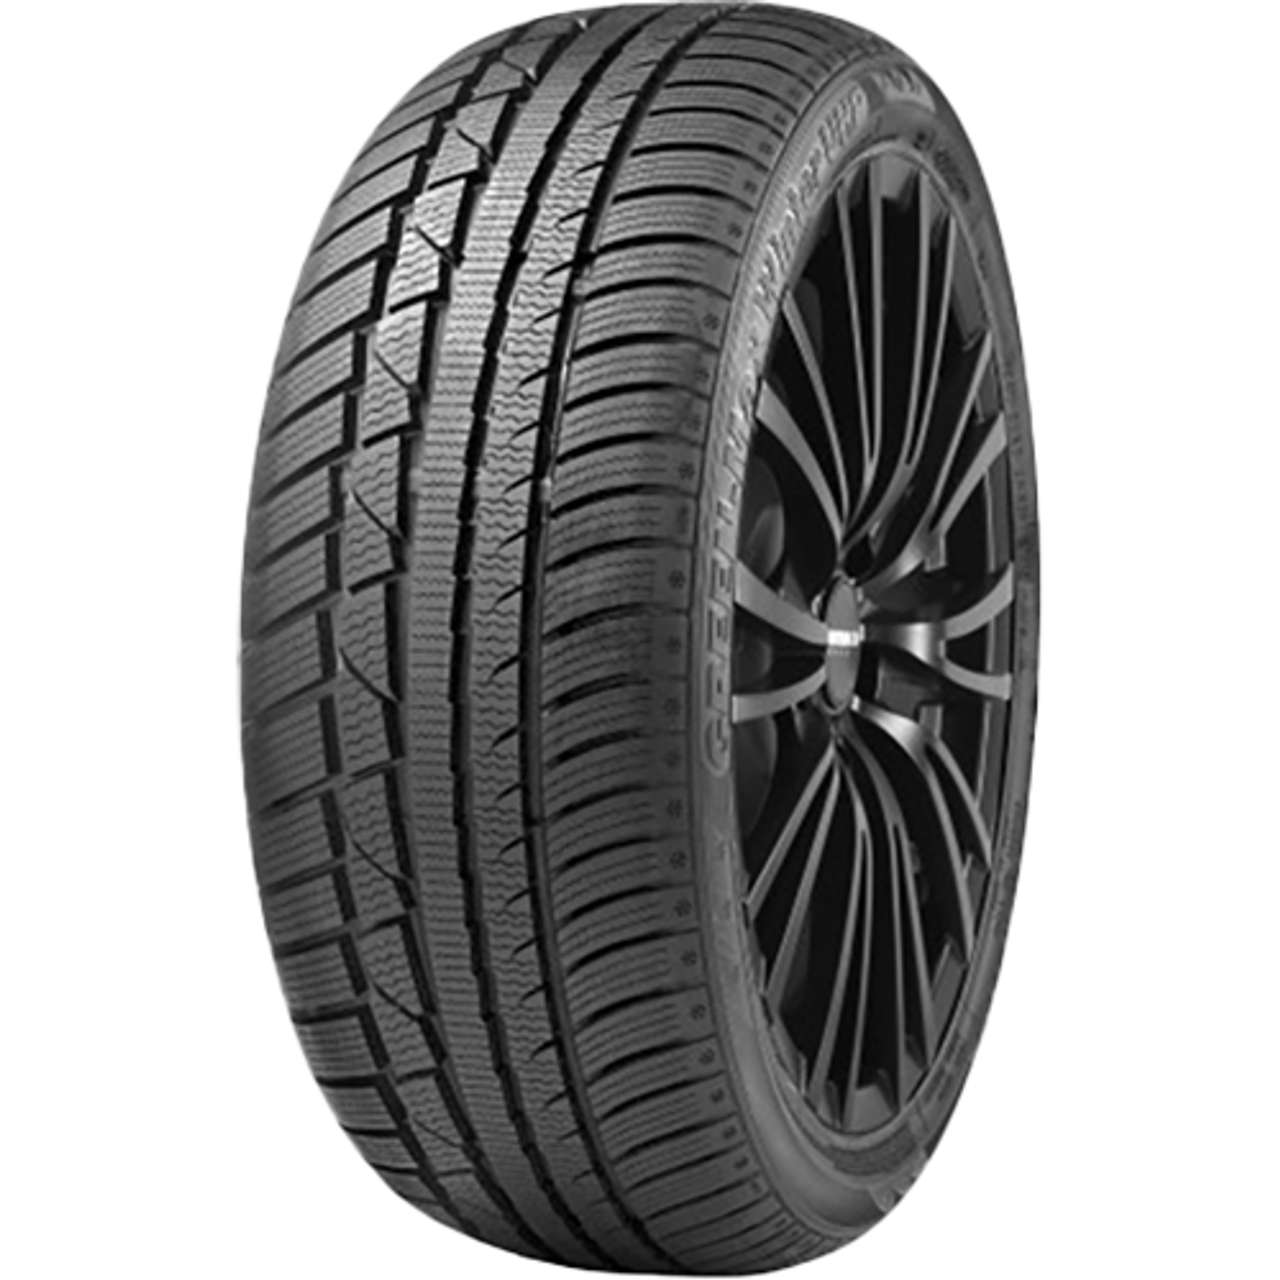 LINGLONG GREEN-MAX WINTER UHP 275/40R19 105V MFS BSW XL